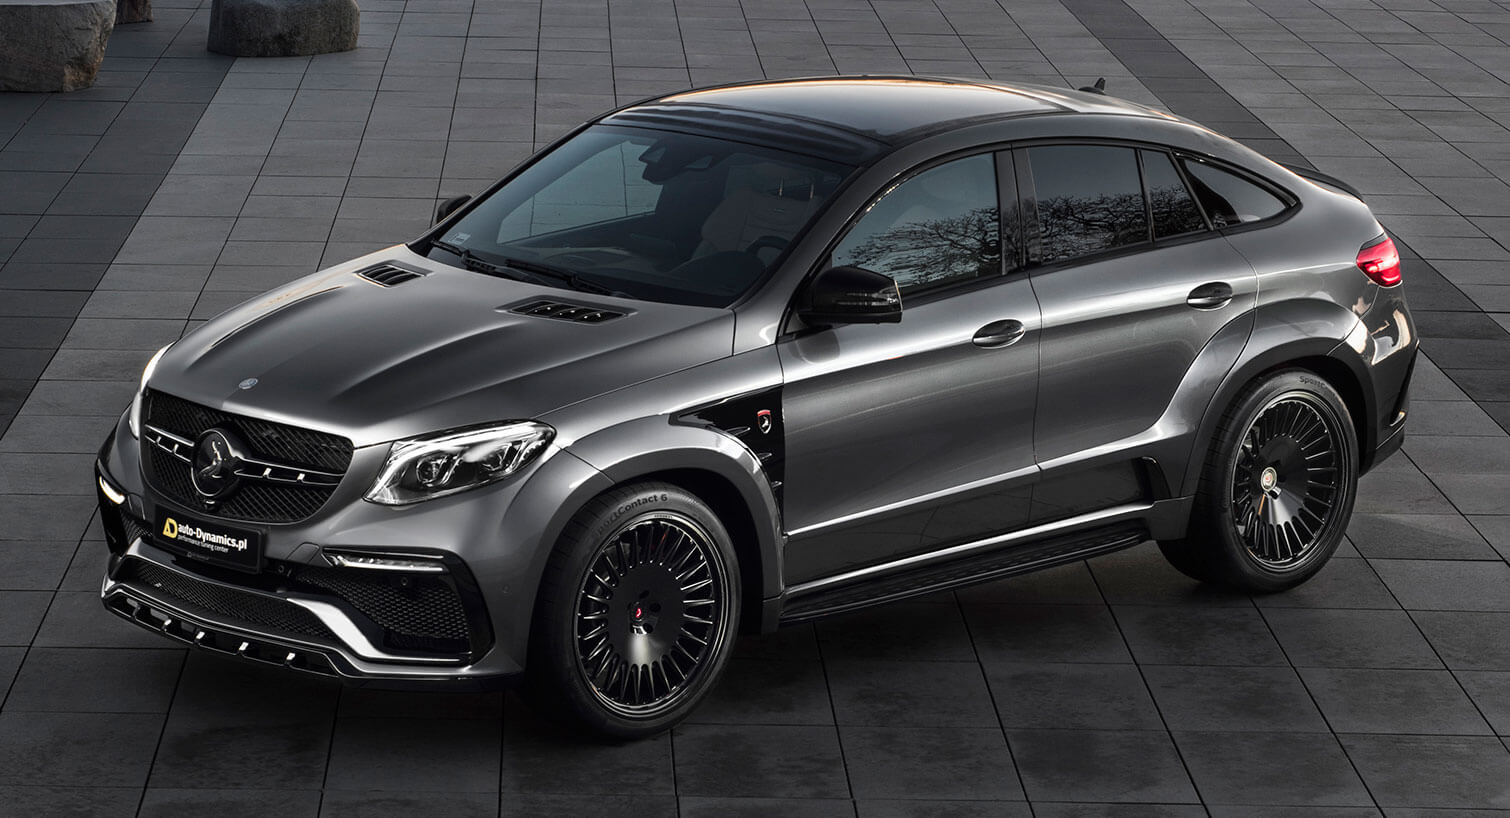 Mercedes Amg Gle 63 S Coupe Pumped To 795 Hp Hits 62 Mph In 325 Sec